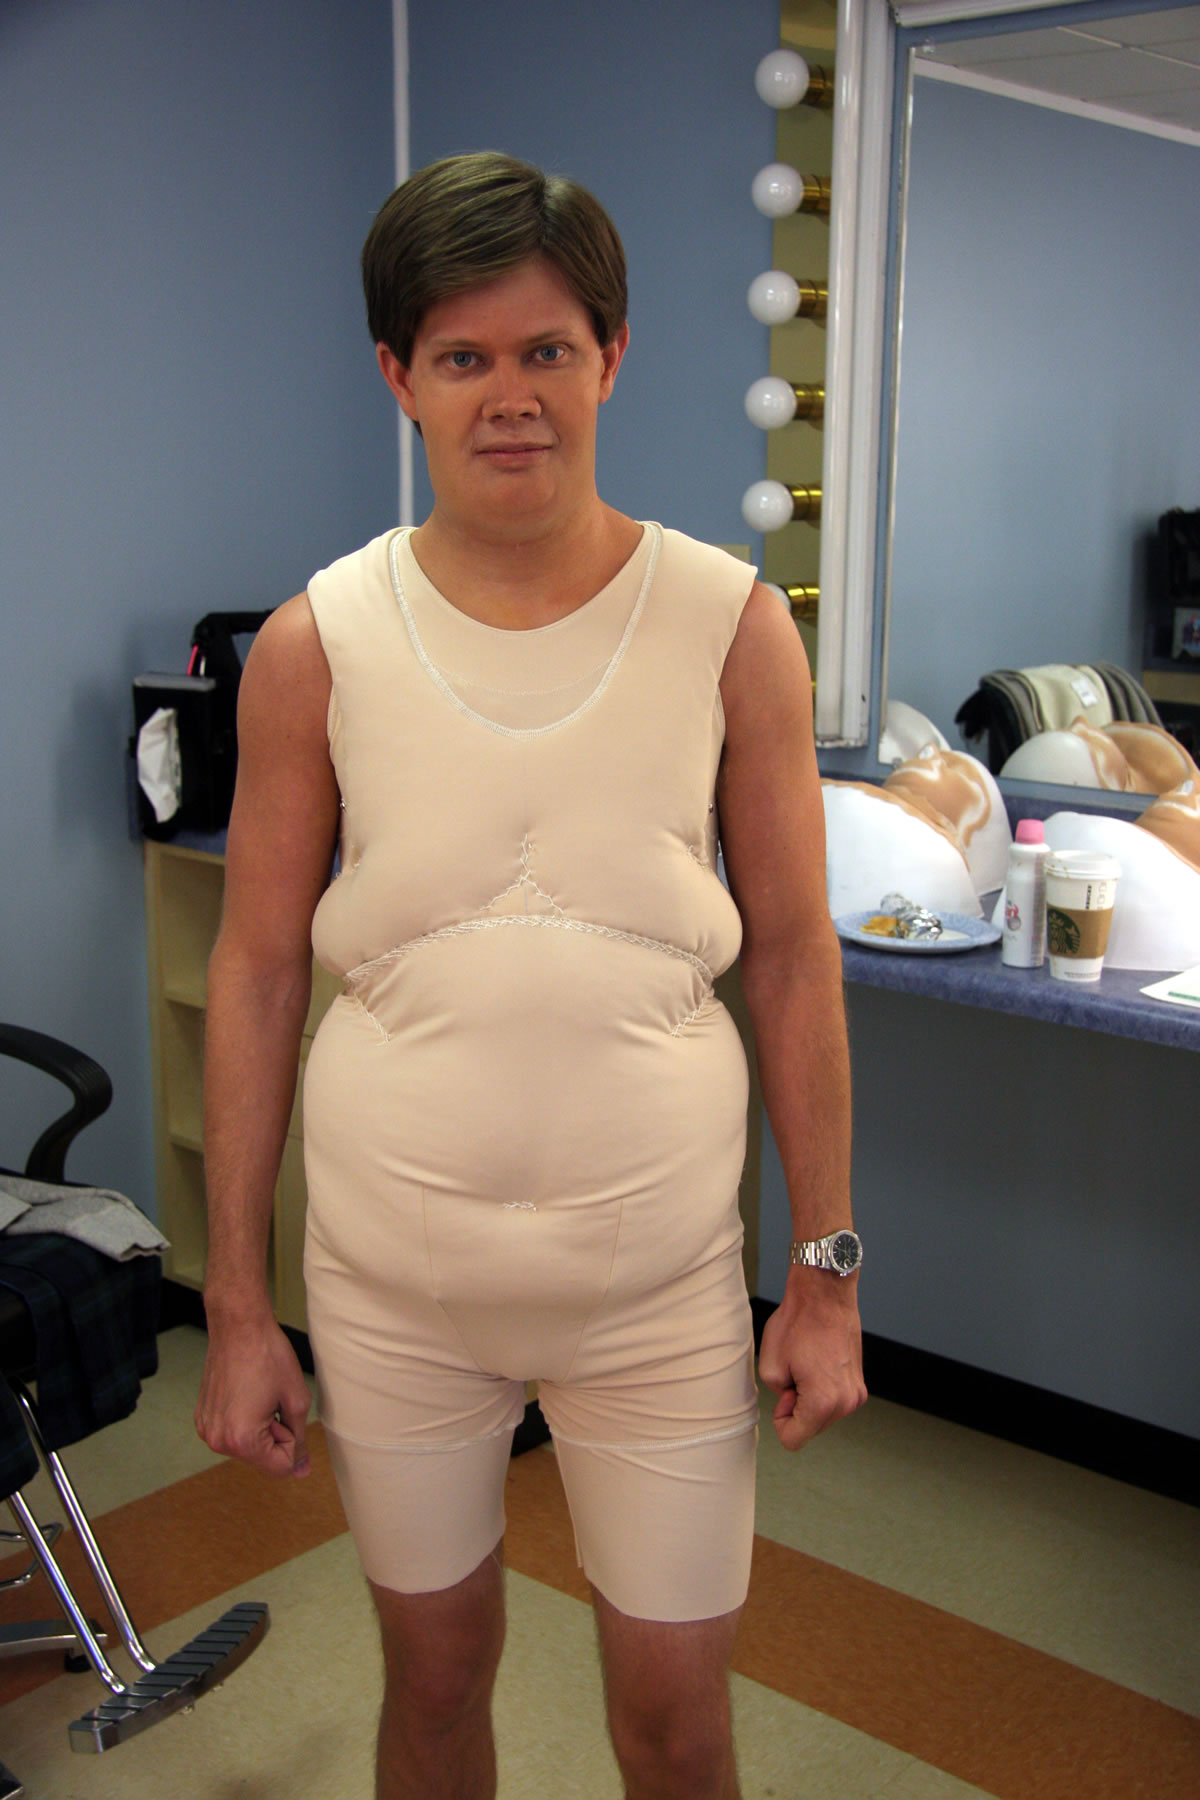 Under fat suit for the series 'One Tree Hill'